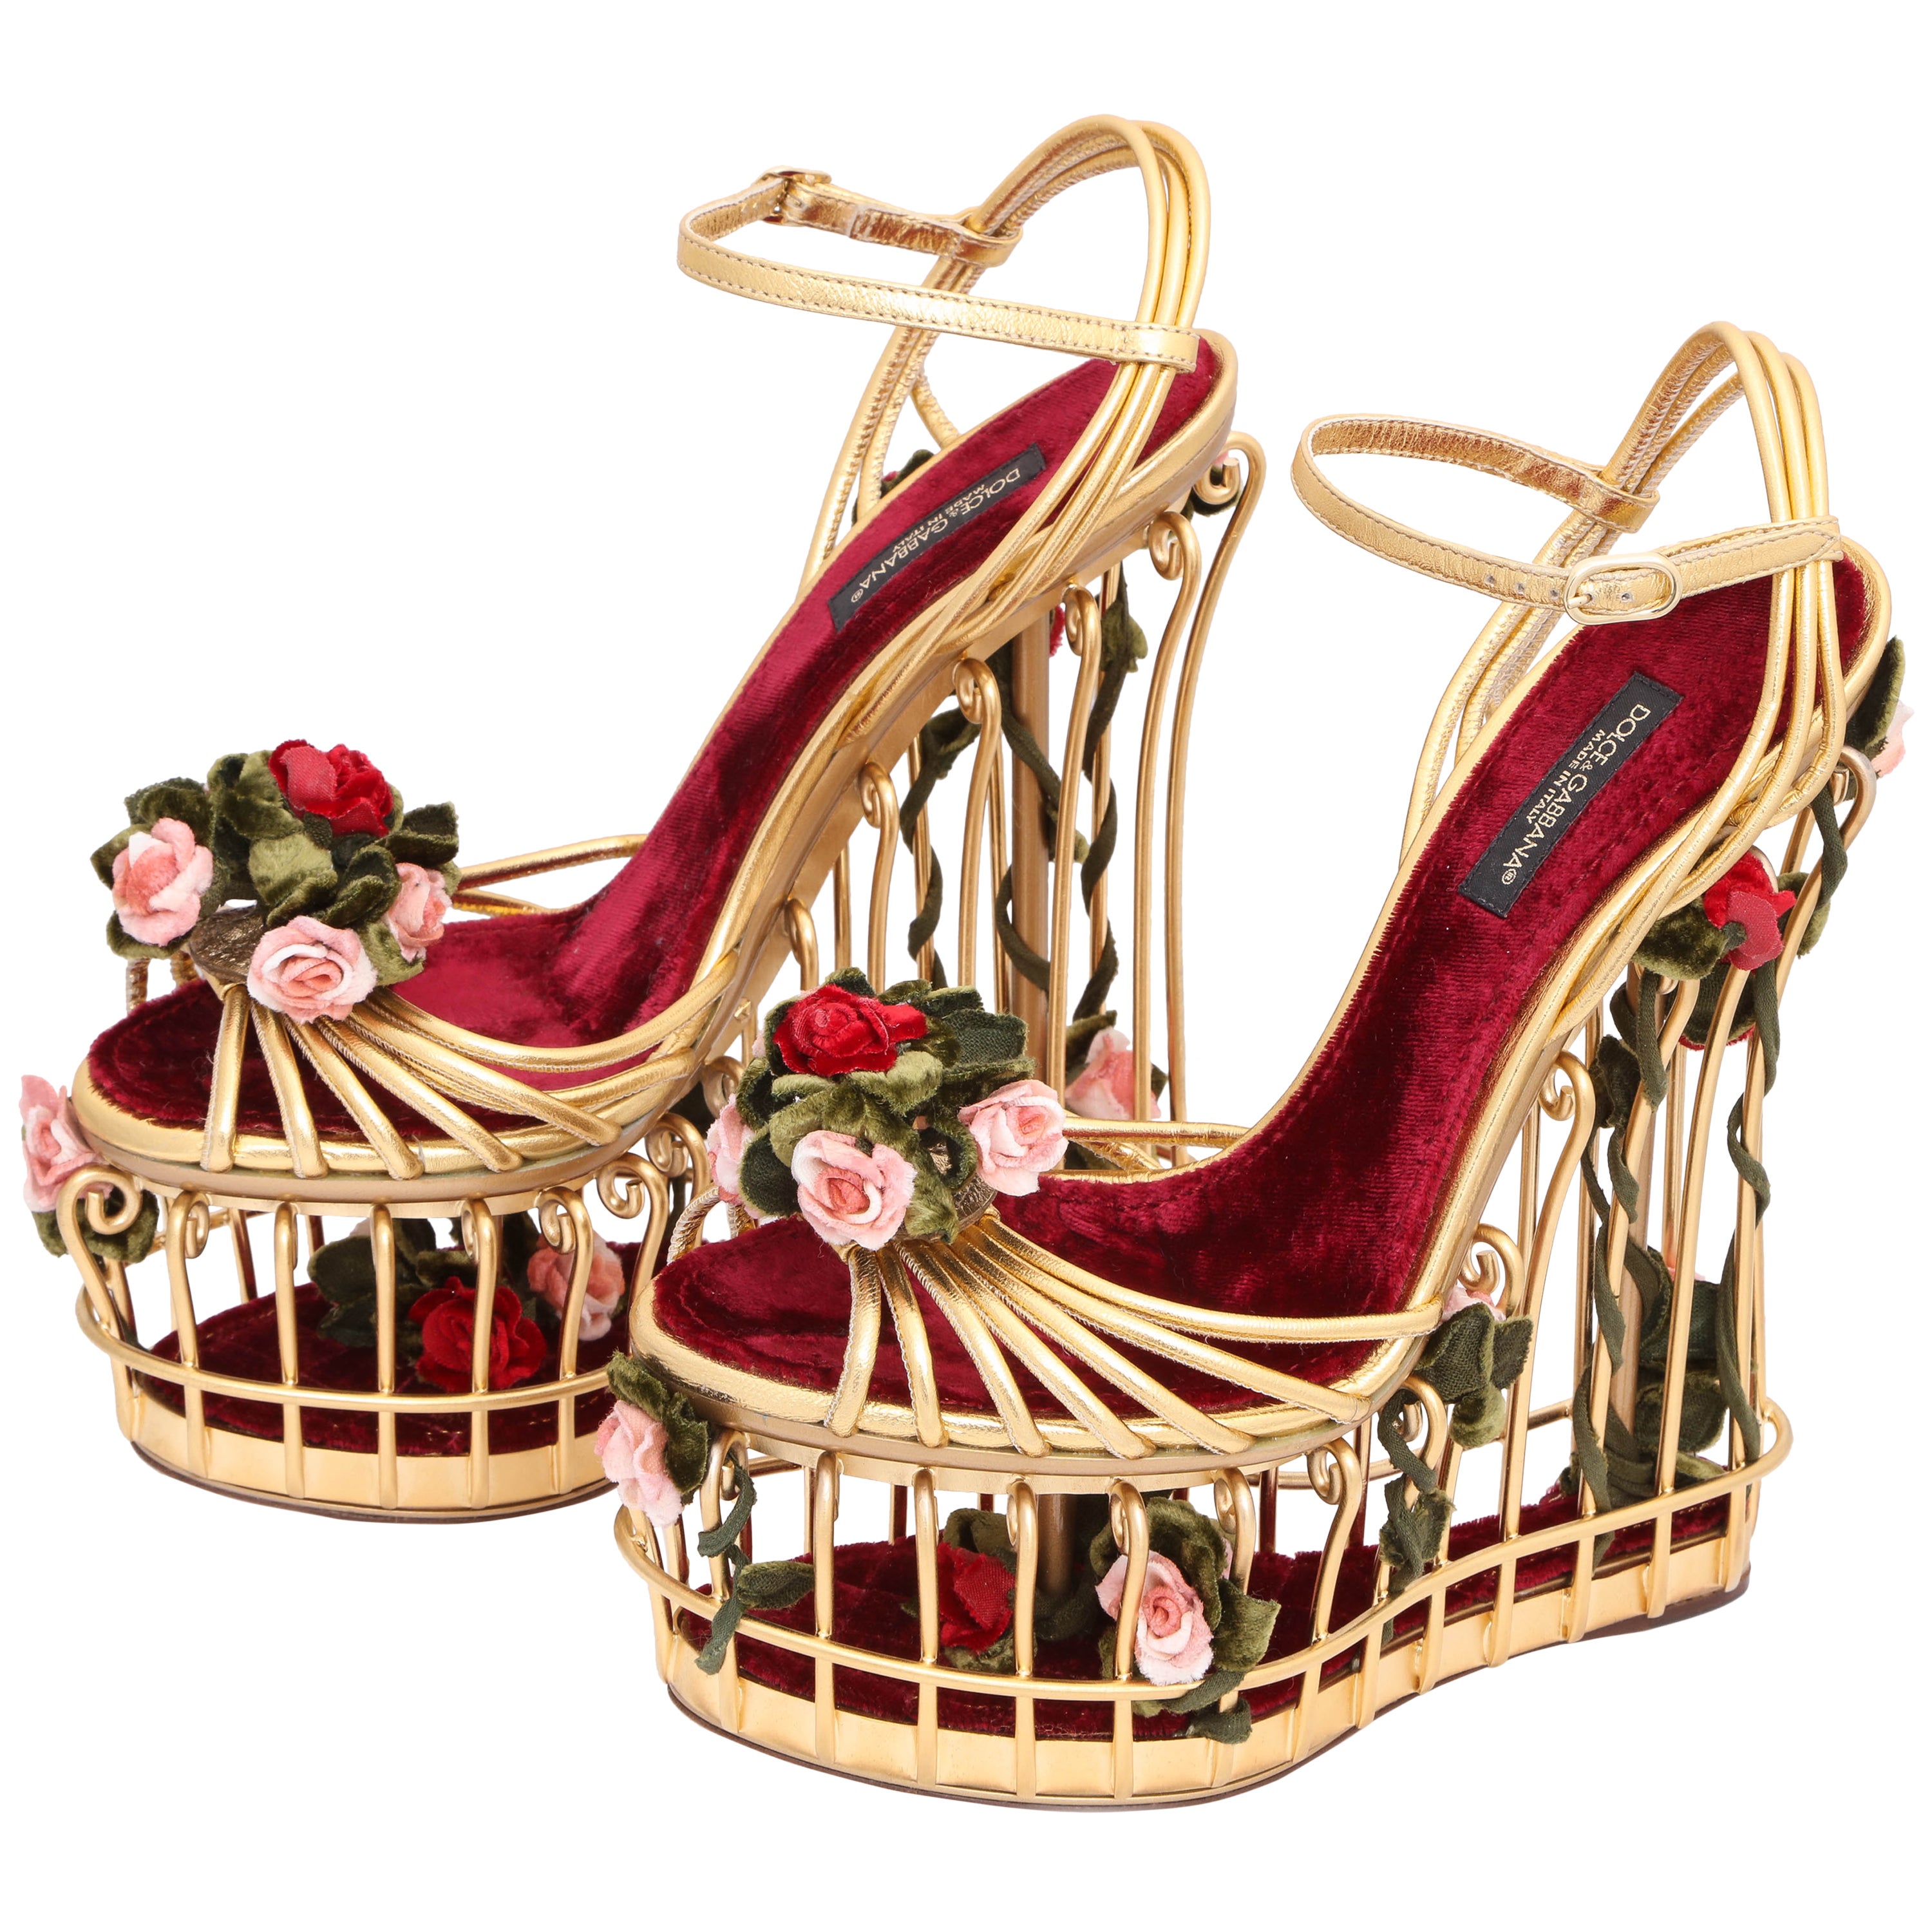 Arriba 61+ imagen dolce and gabbana bird cage shoes